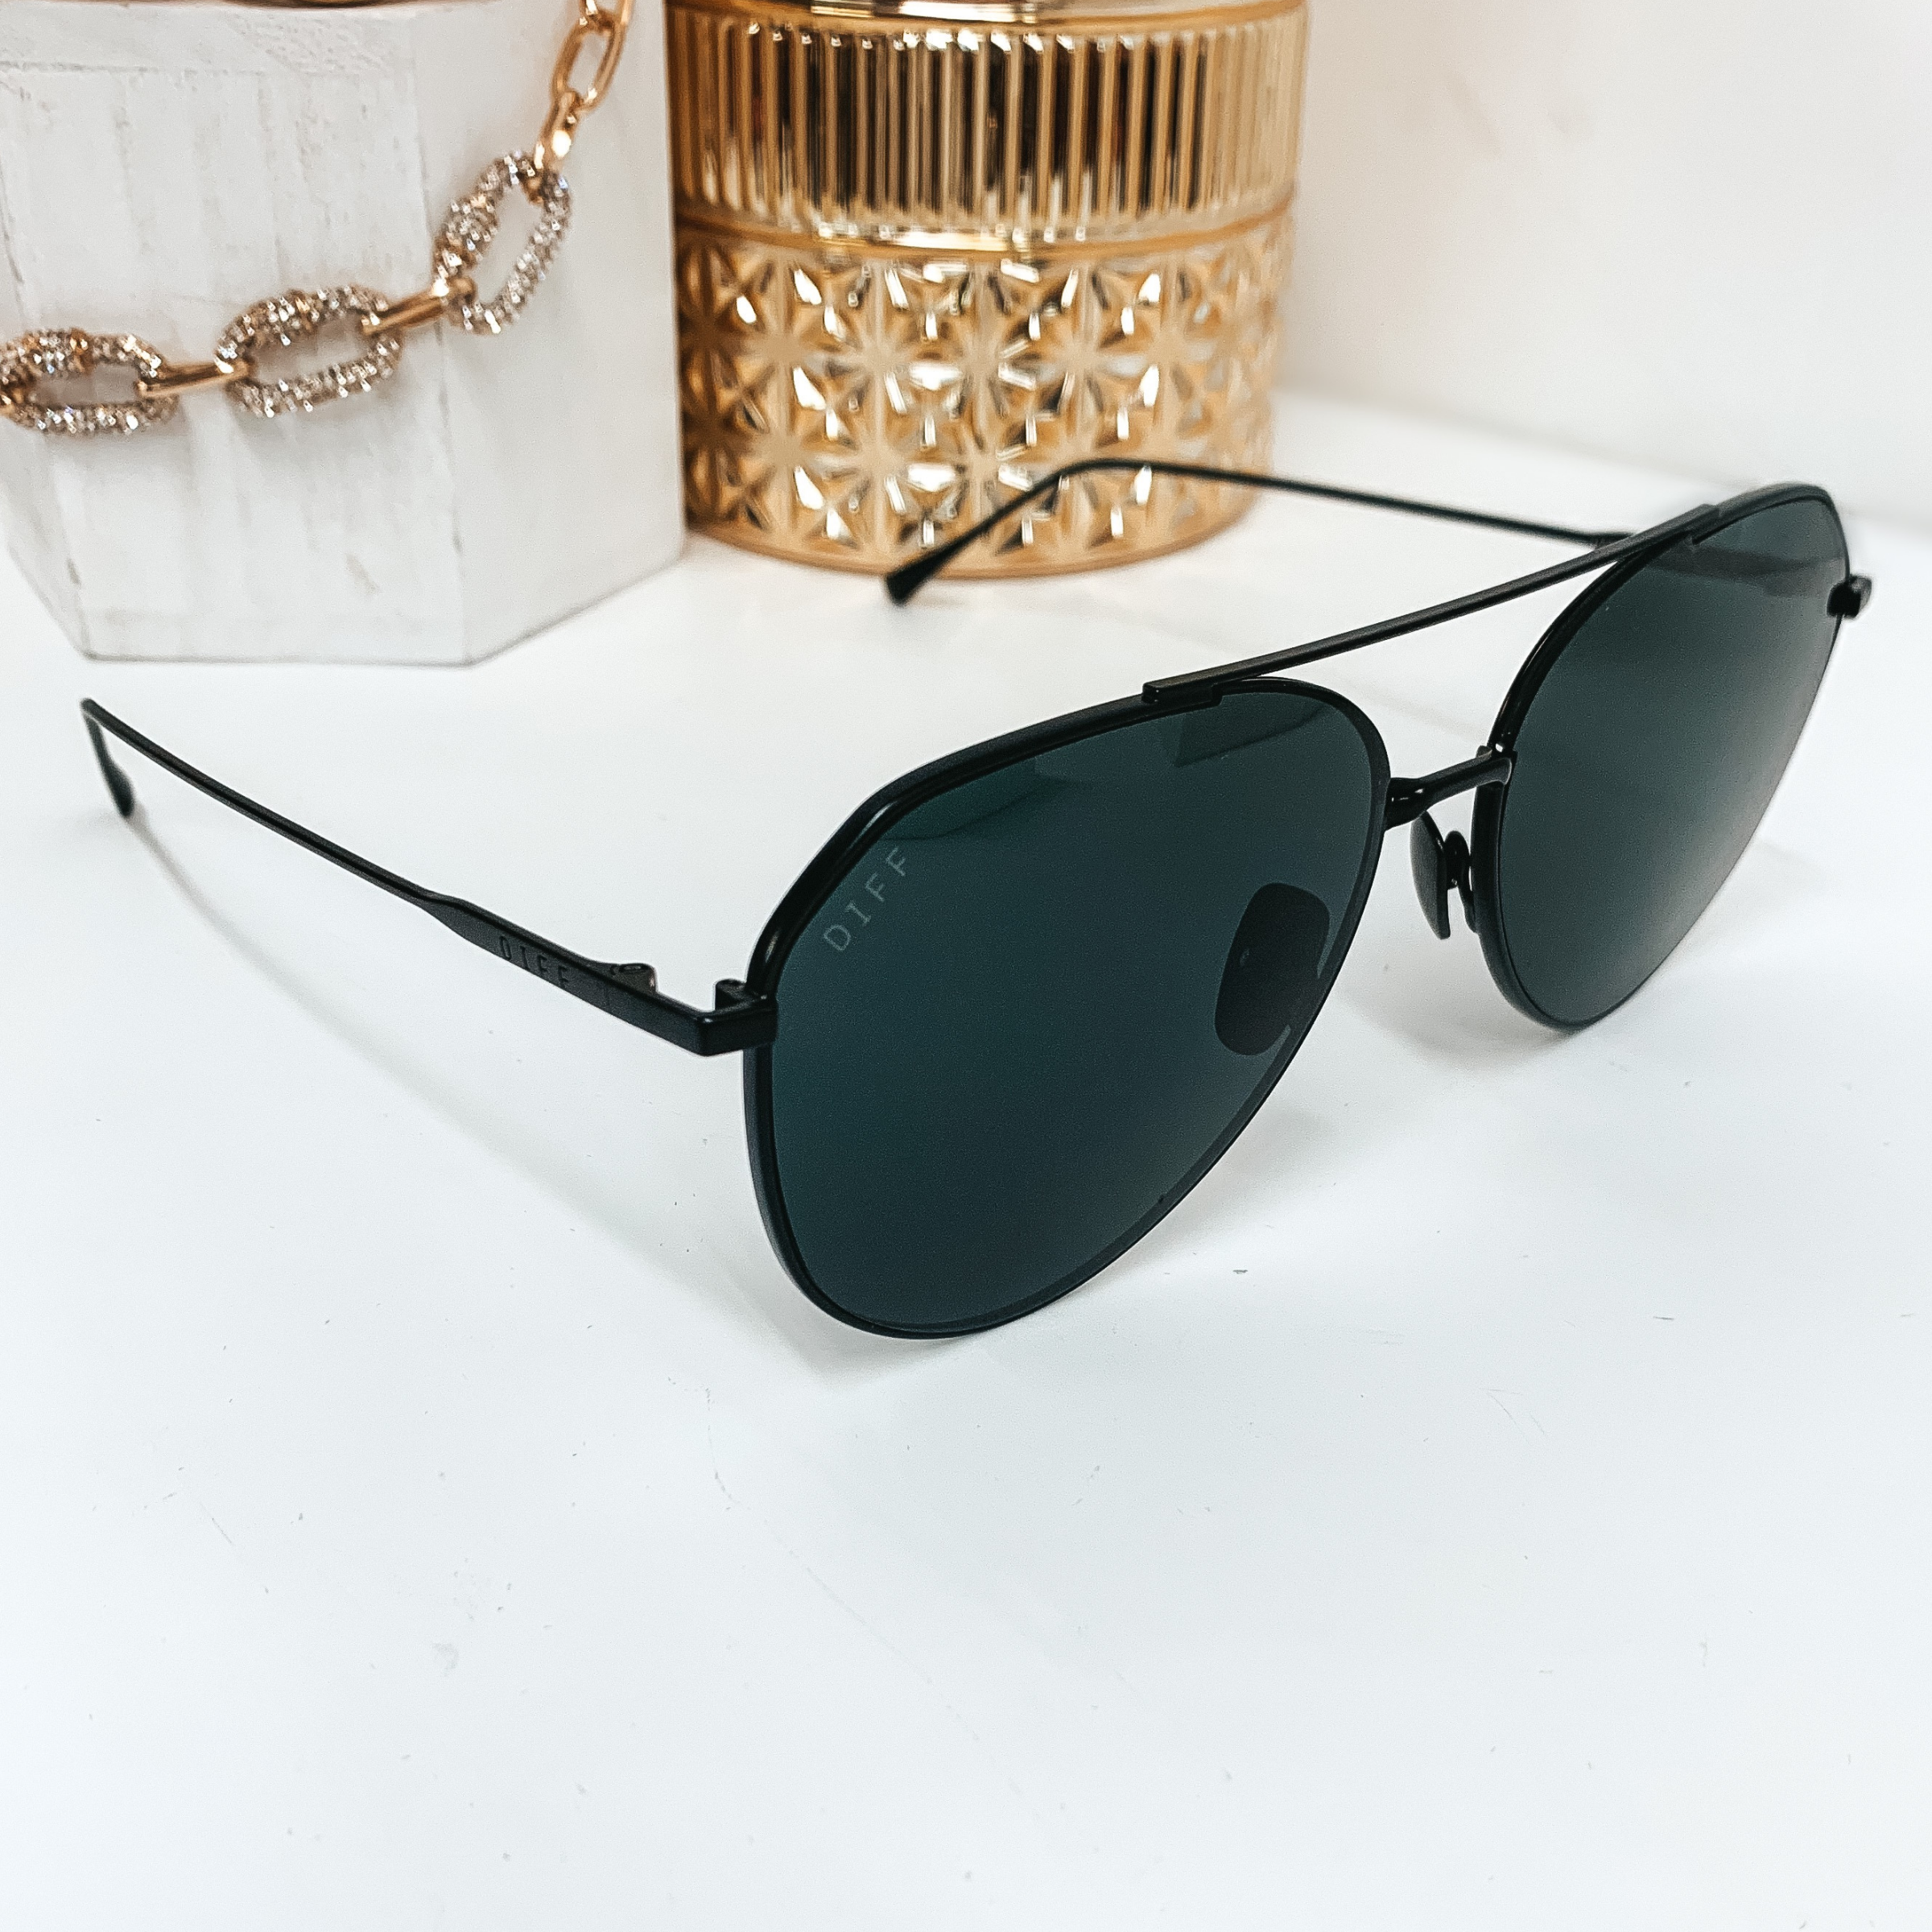 DIFF | Dash Polarized Black Lens Sunglasses in Matte Black - Giddy Up Glamour Boutique